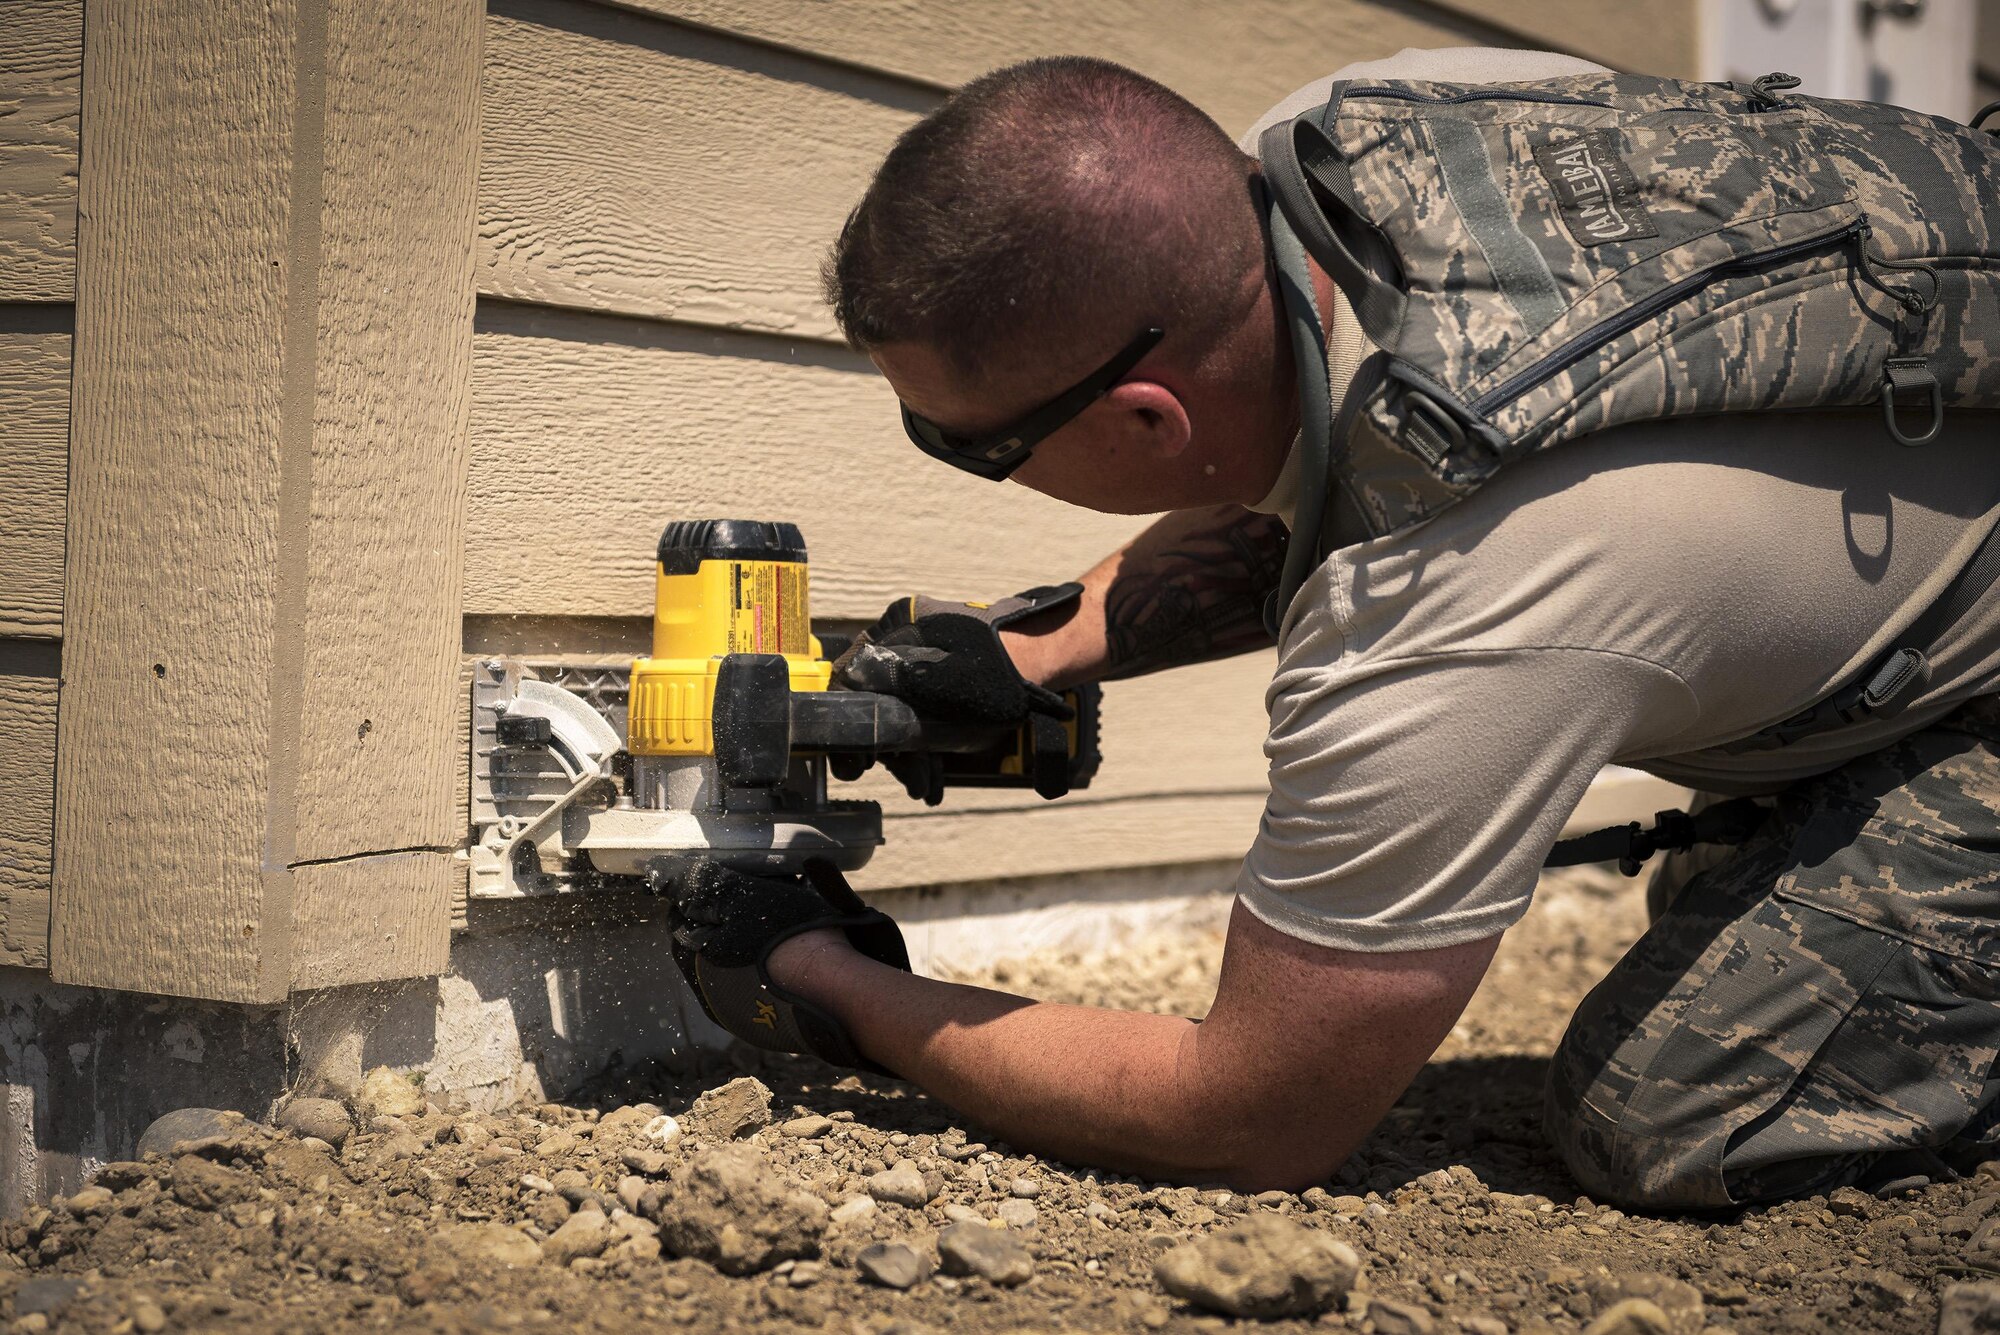 U.S. Air Force Staff Sgt. Christopher Boen, a pavement and construction equipment specialist with the 182nd Civil Engineer Squadron, Illinois Air National Guard, trims siding during annual training in Crow Agency, Mont., July 24, 2017. The squadron helped build homes for Native American veterans as part of the Department of Defense’s Innovative Readiness Training civil-military relations program. (U.S. Air National Guard photo by Tech. Sgt. Lealan Buehrer)